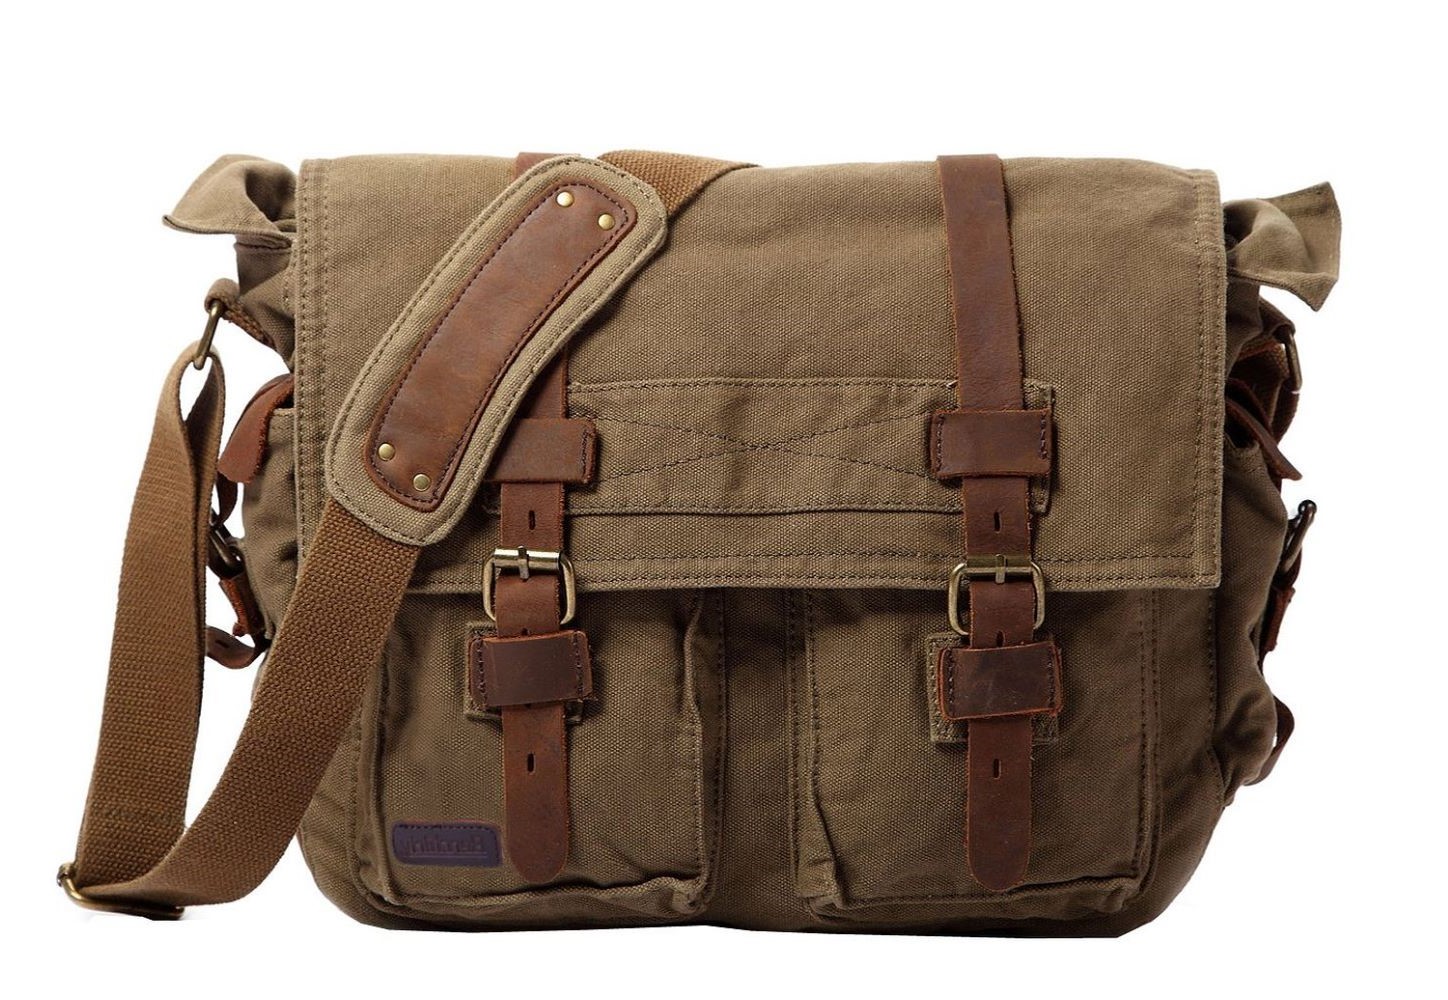 Stylish and Functional Men’s Messenger Bag Review: A Must-Have for Him